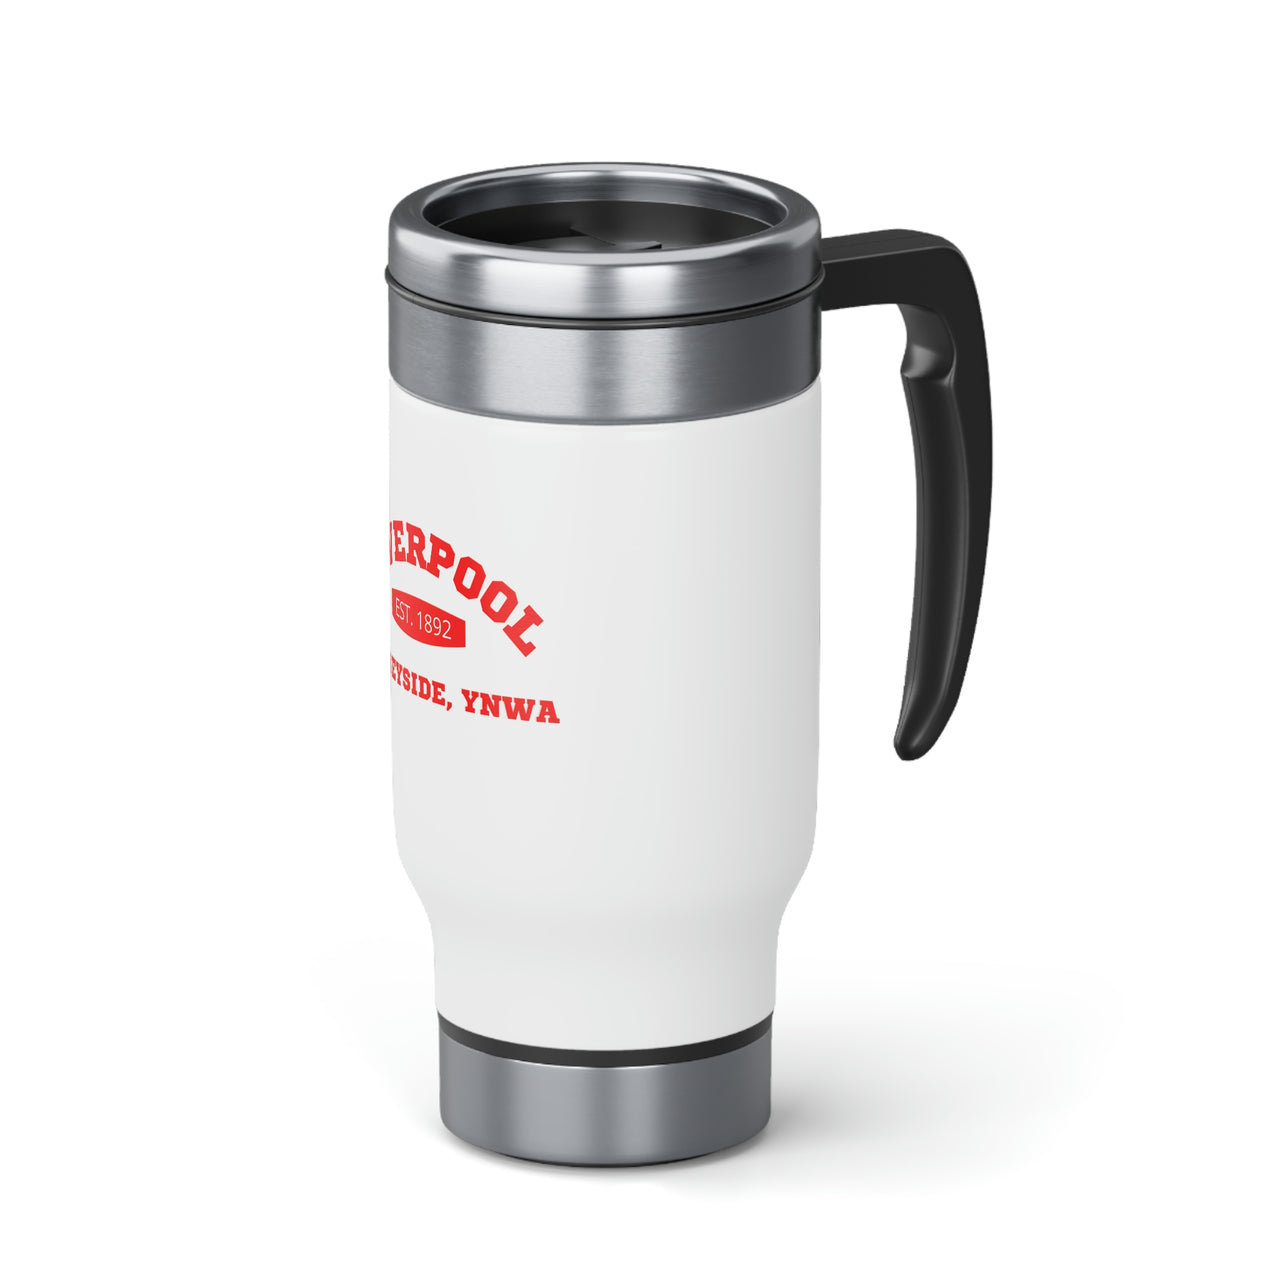 Liverpool Stainless Steel Travel Mug with Handle, 14oz